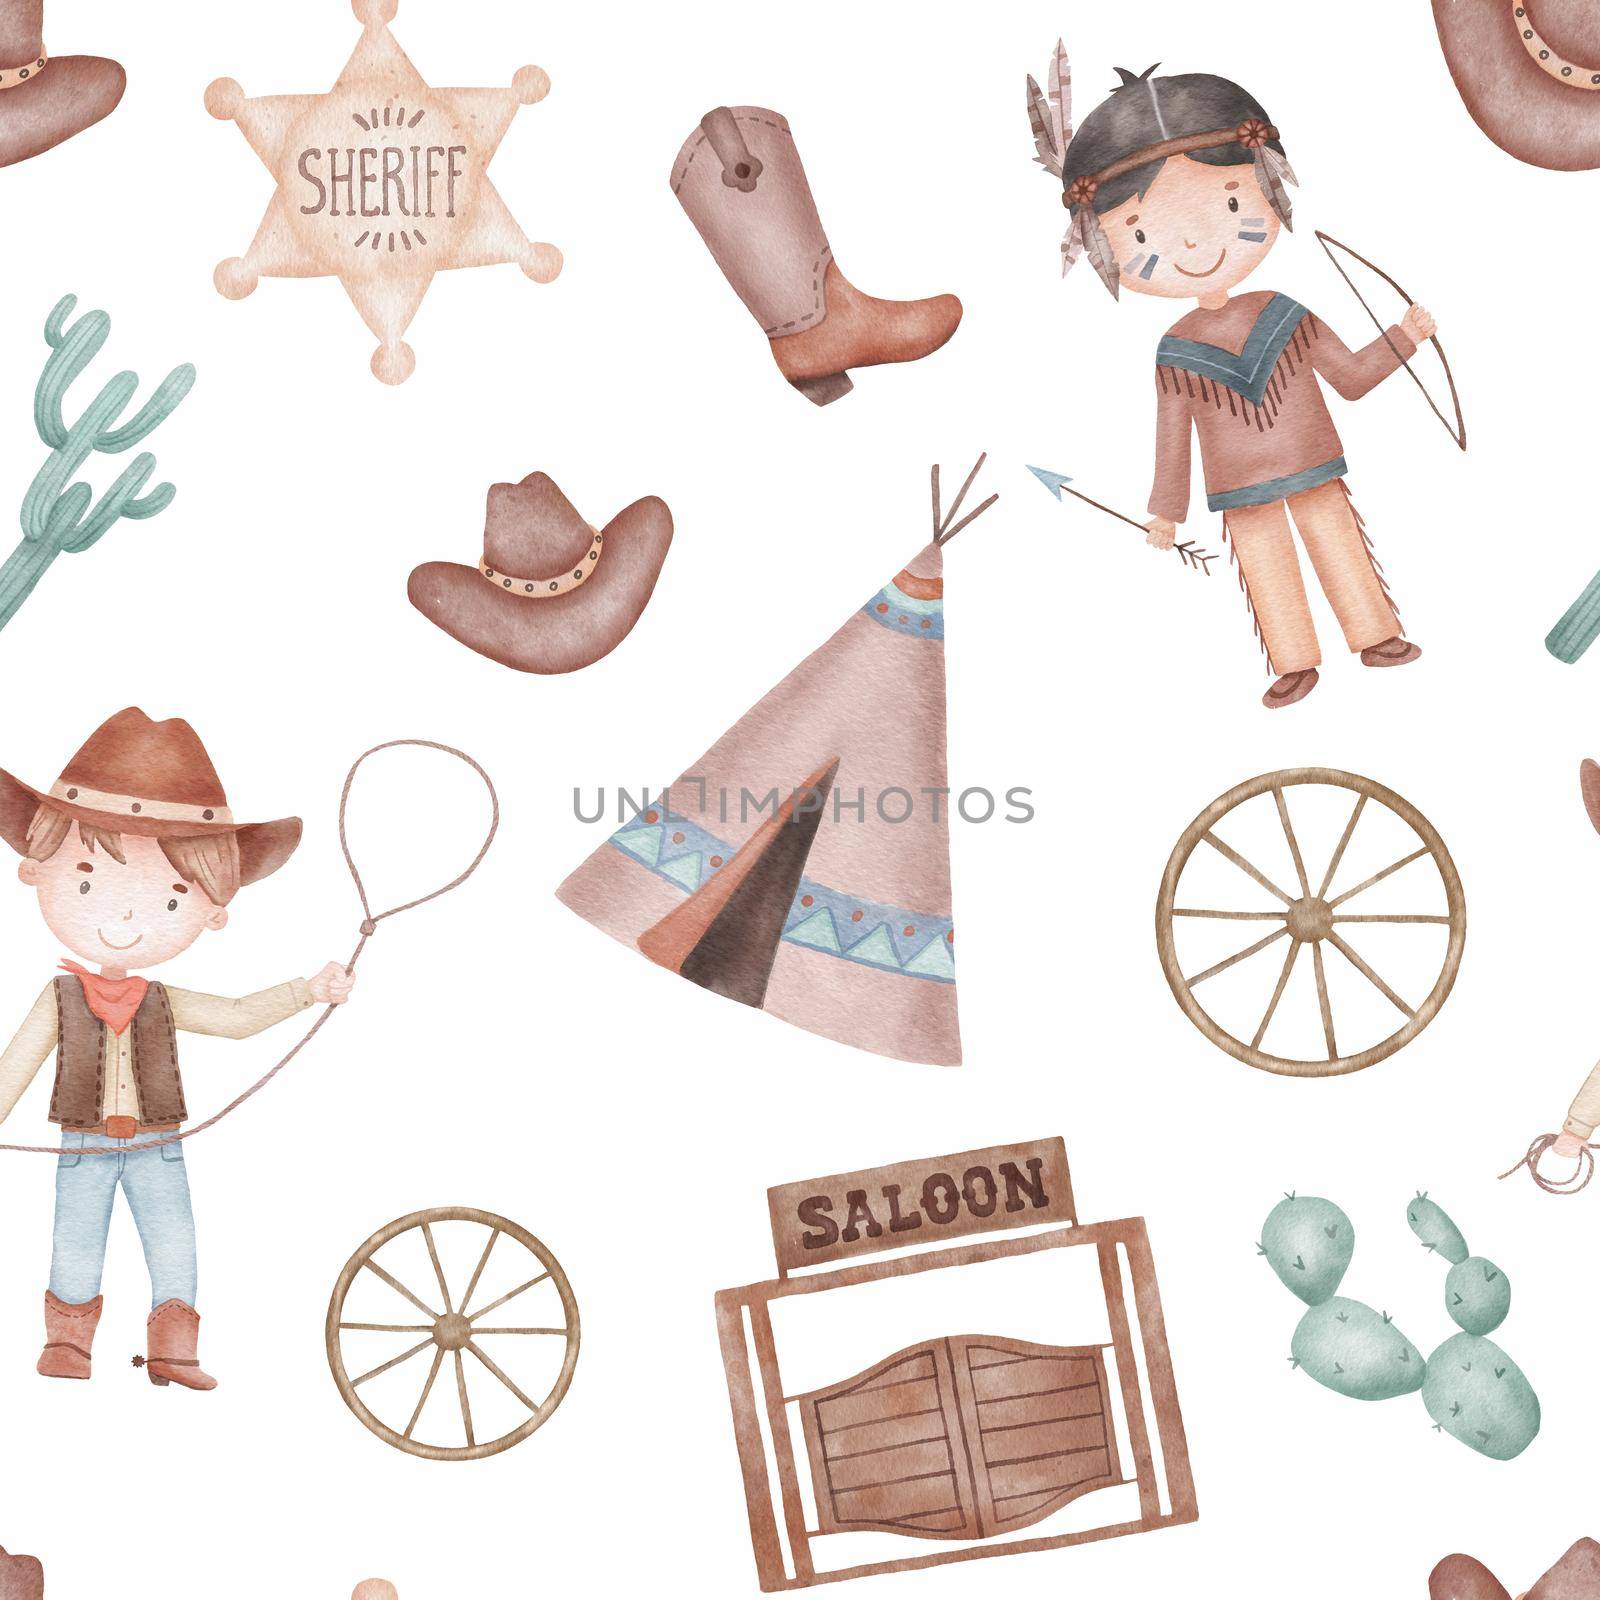 Watercolor hand drawn seamless pattern with indian boy in costume and cowboy with rope lasso. Cute childish illustration on white background. Wild west theme by ElenaPlatova